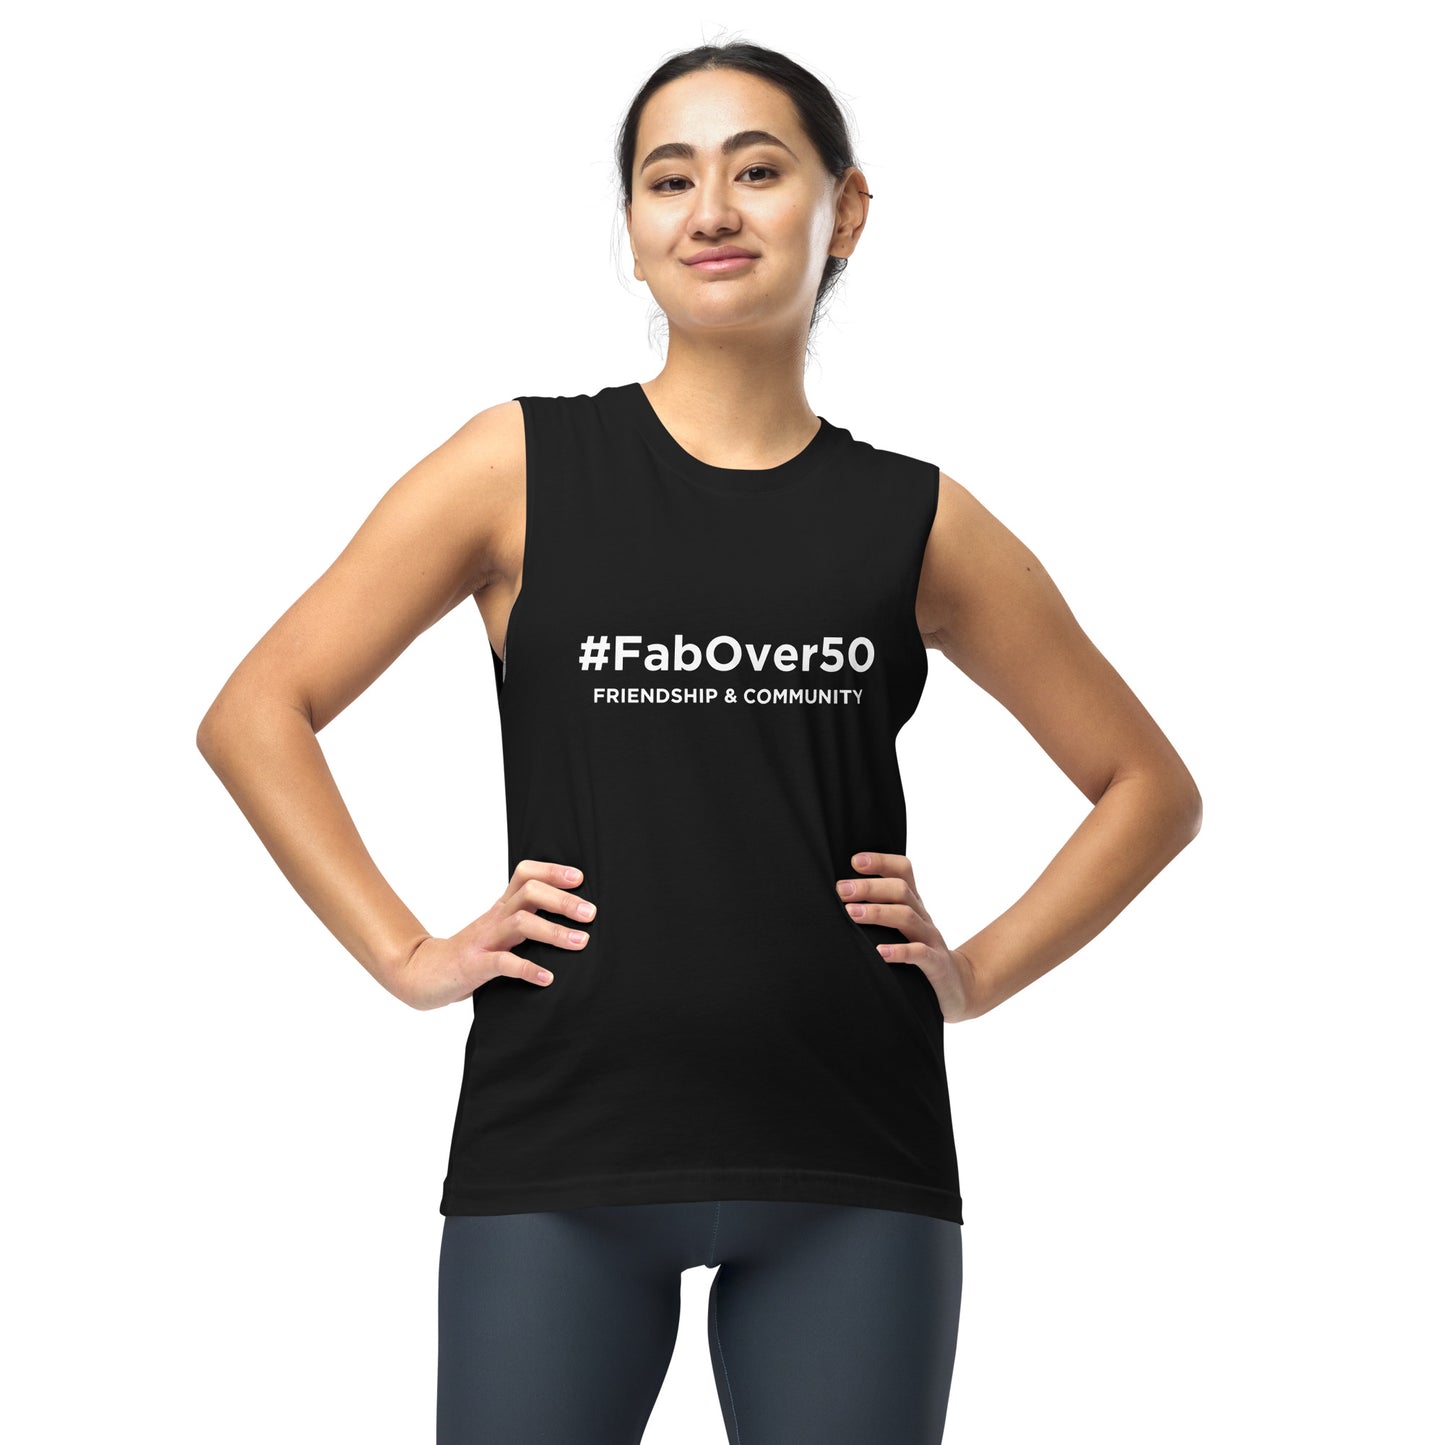 Unisex Muscle Shirt - Black with White Writing - Leaderboard Name on Back